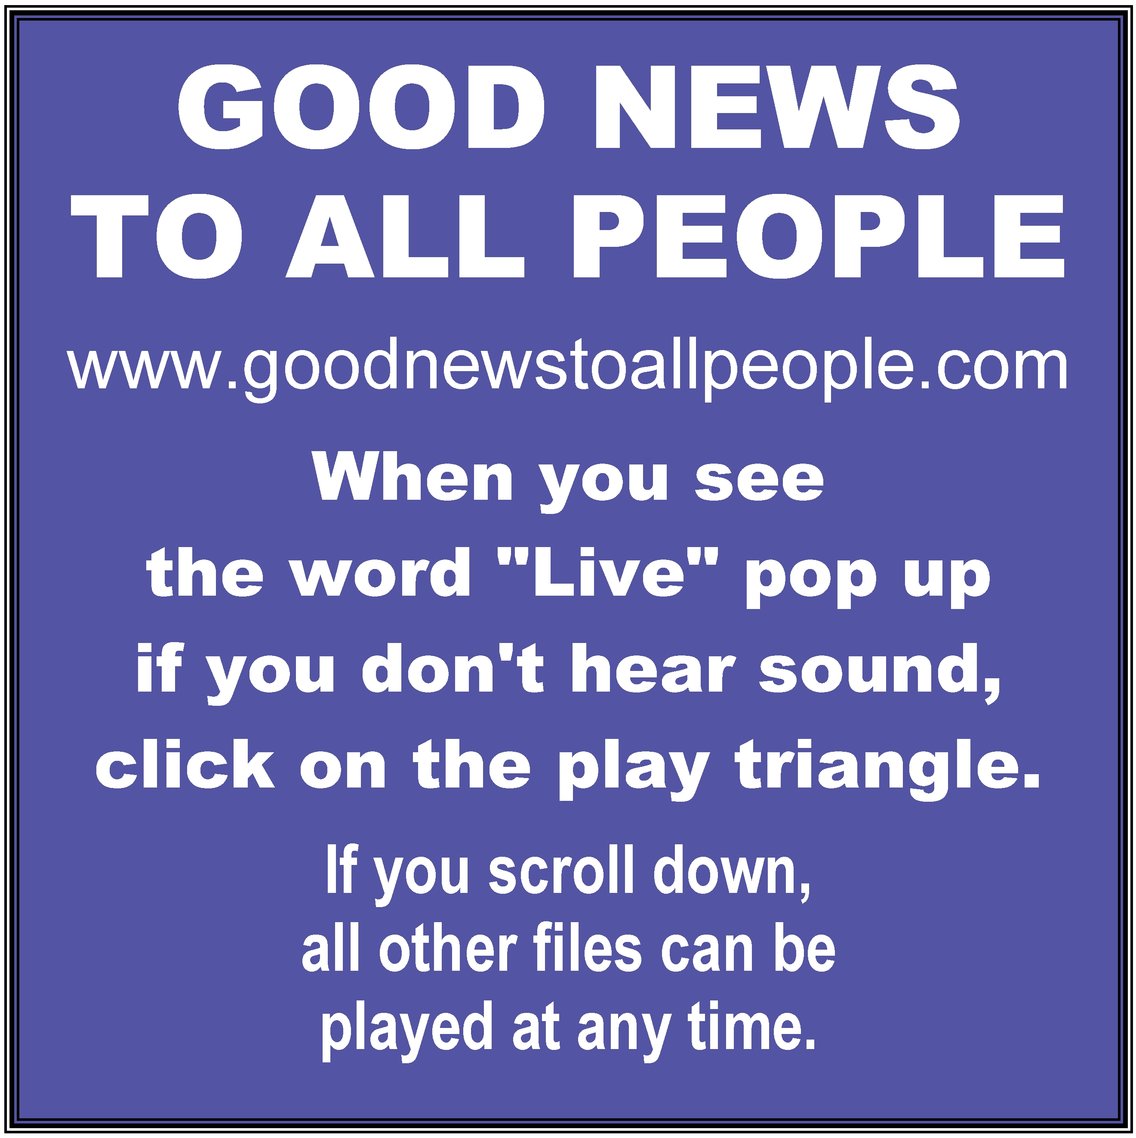 Good News to All People - Cover Image